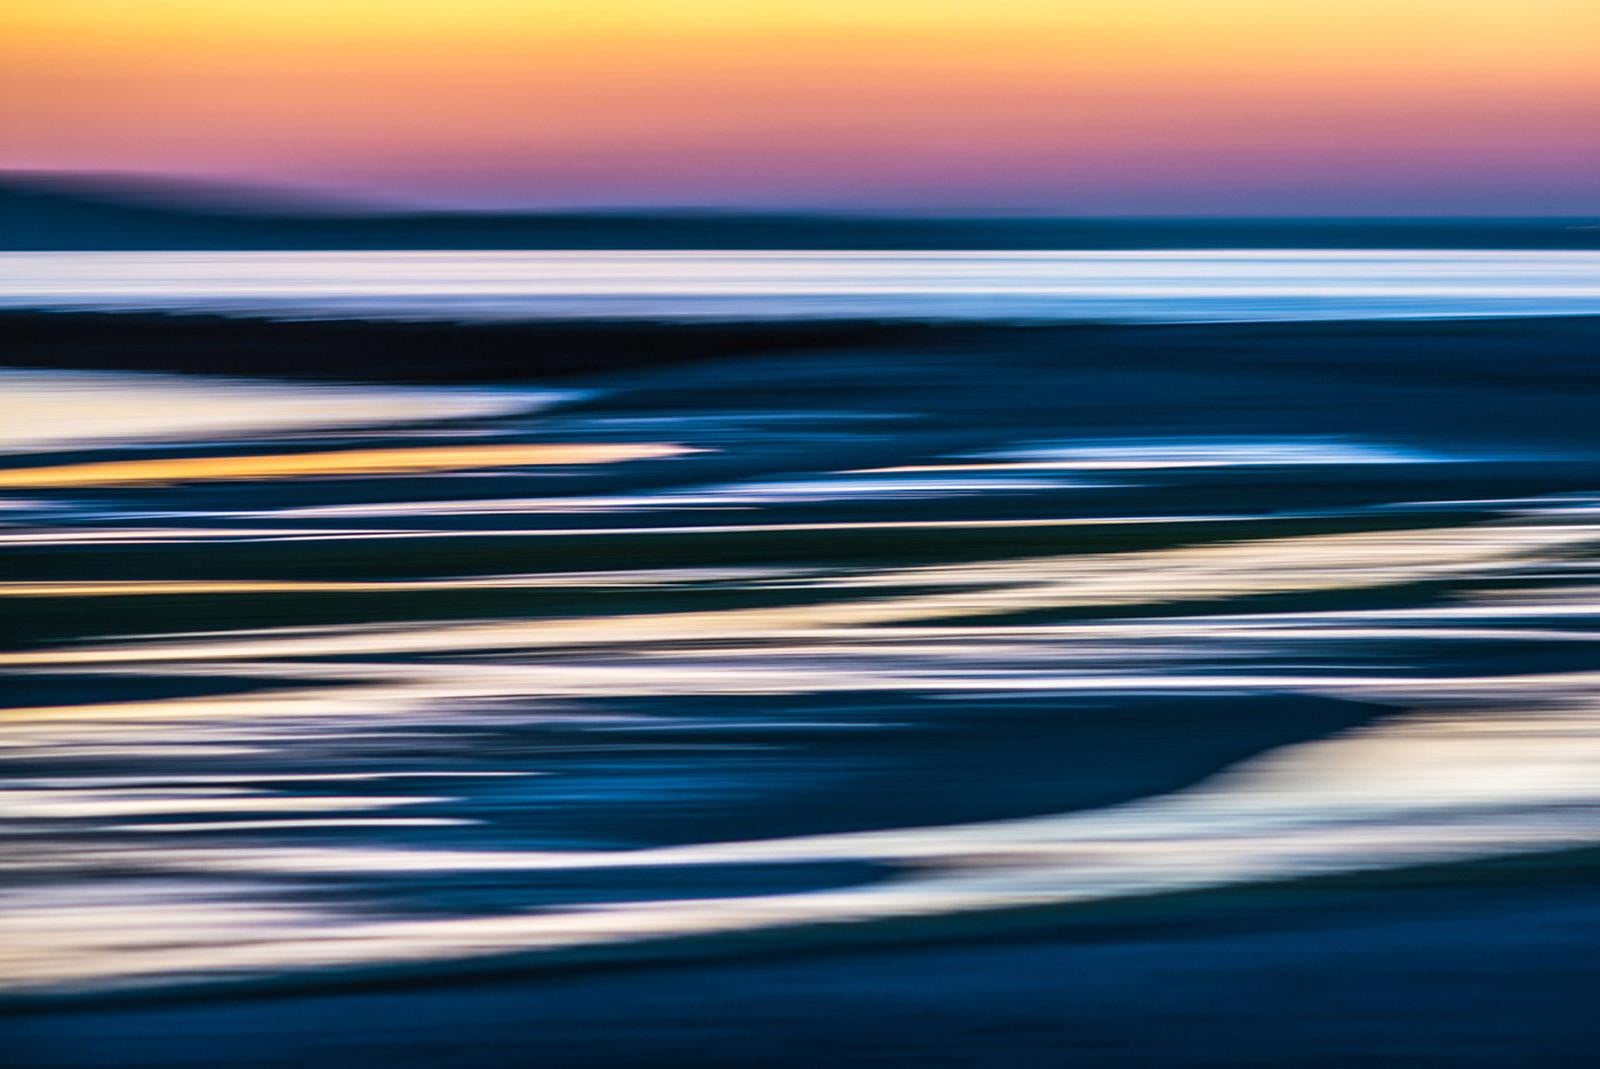 Impressionistic photo of an autumn sunset reflected in tidal flats at low tide. Shot in Glen Cove, Long Island. 

Printed on archival fine art paper, mounted on dibond aluminum with a float mount backing. Available in a wide variety of custom sizes,